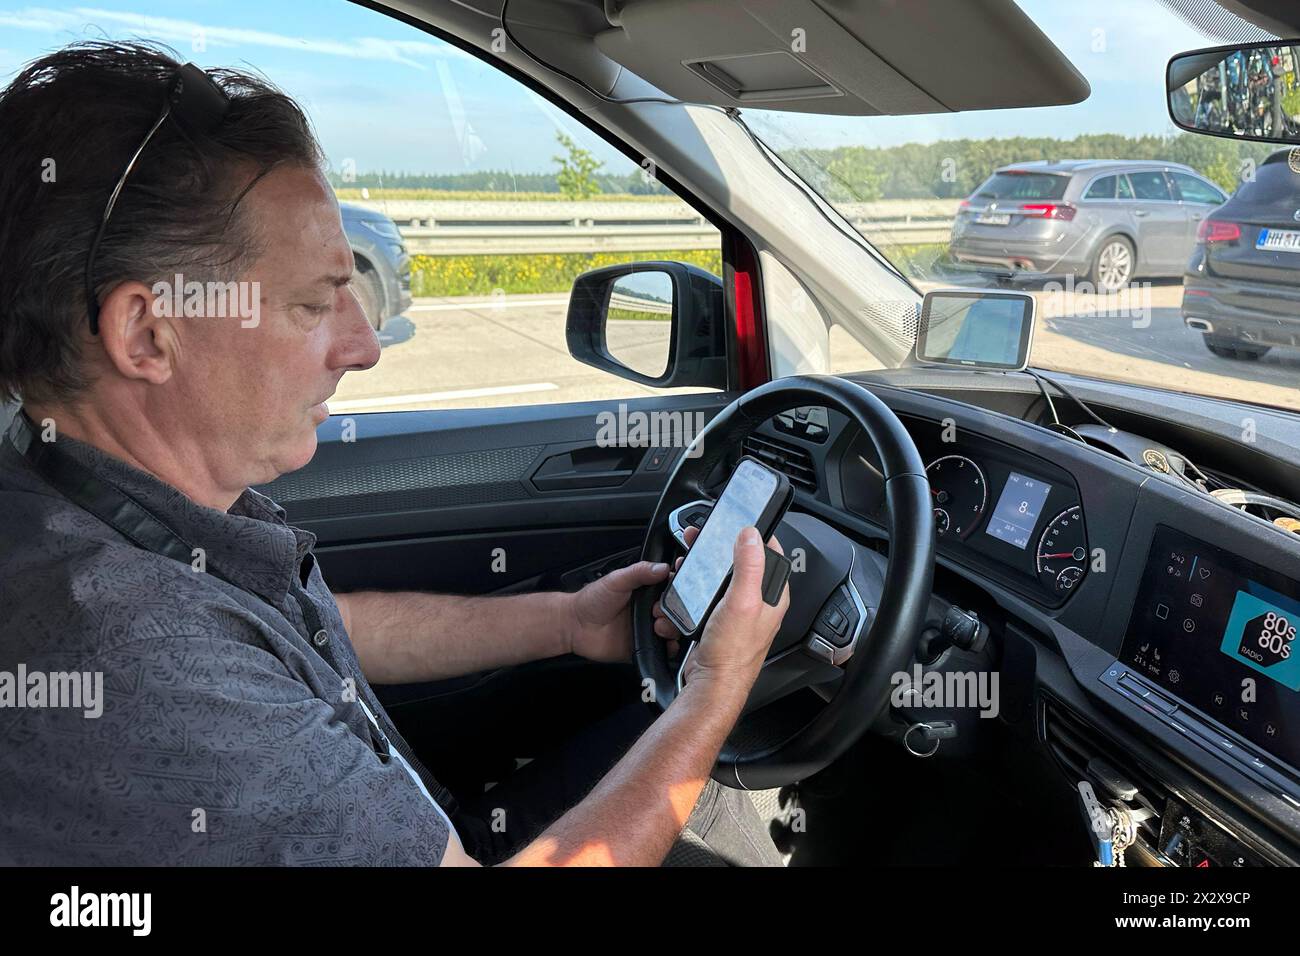 19.08.2023, Westenholz, Lower Saxony, Germany - Driver looking at his smartphone in a traffic jam on the A7. 00S230819D657CAROEX.JPG [MODEL RELEASE: Y Stock Photo